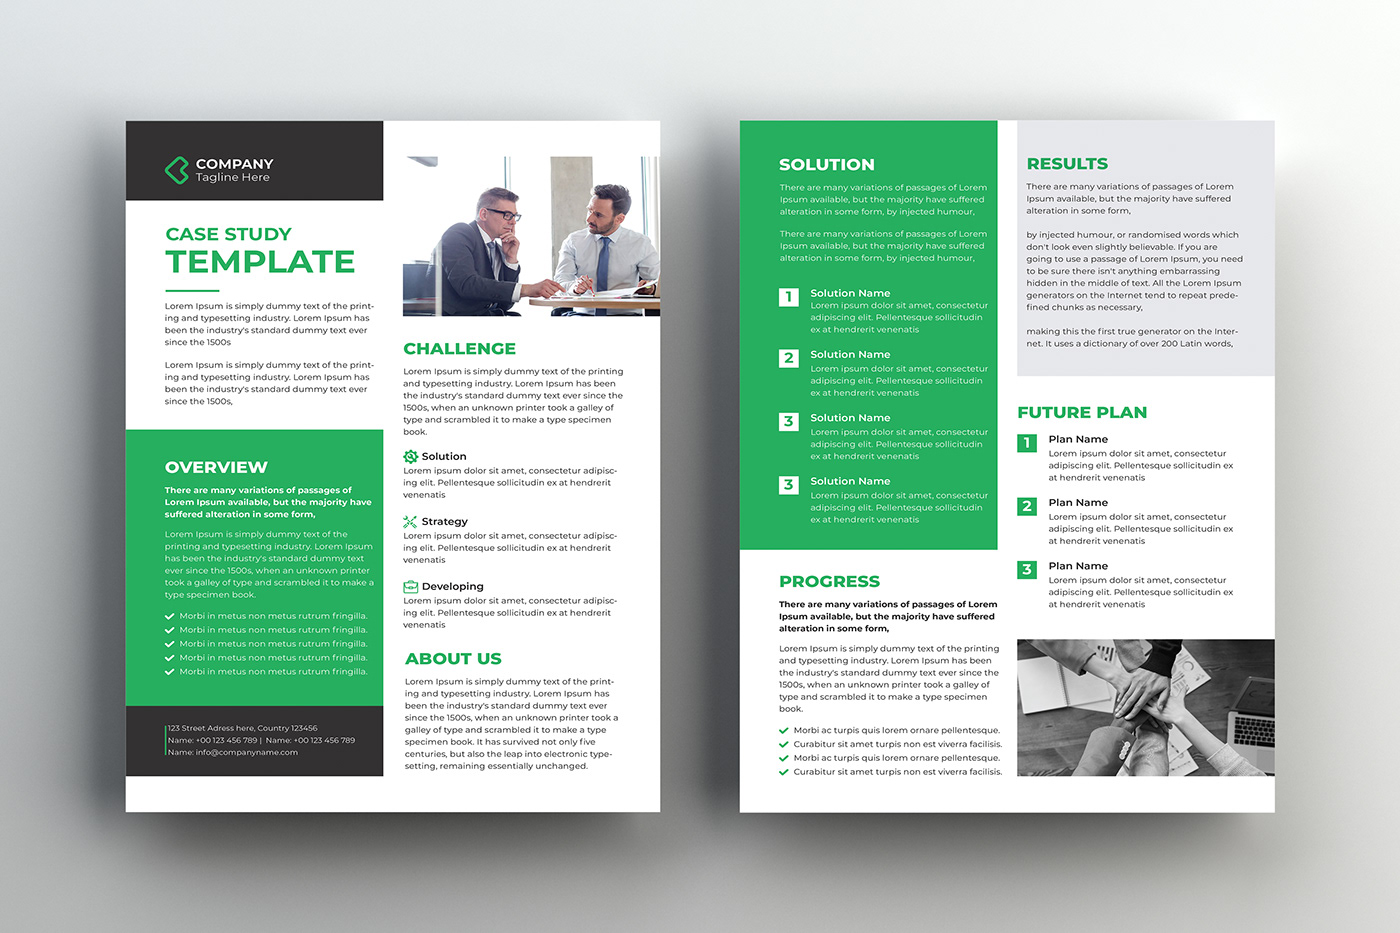 #BEST CASE STUDY #booklet #CASE HISTORY #Case Study #flyer #newsletter  #catalog #Corporate   #multipurpose #research